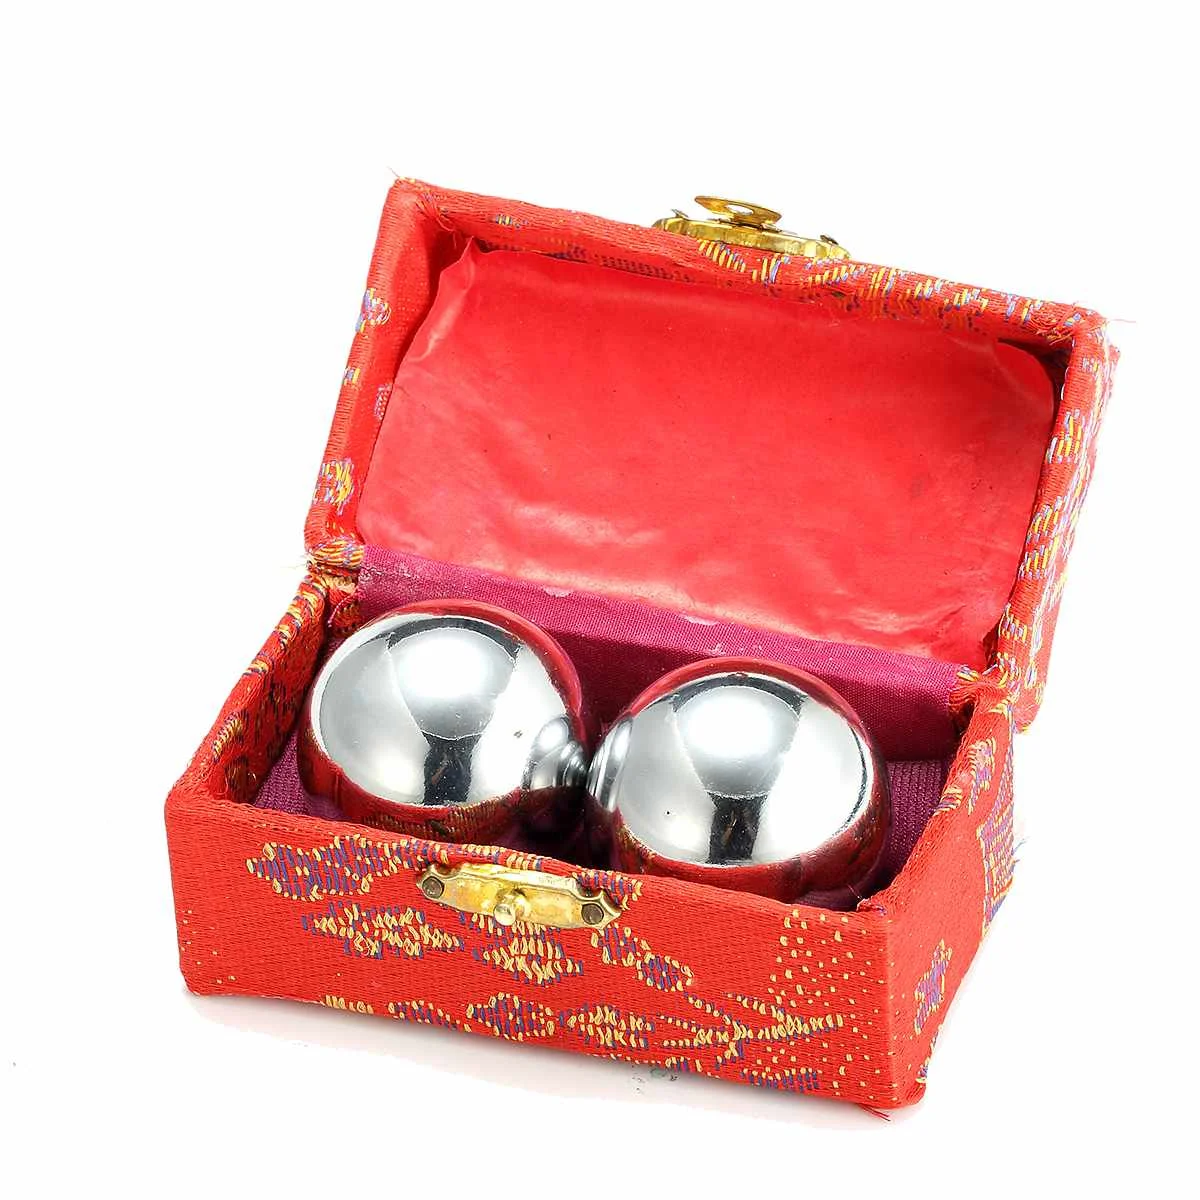 Boading balls Chinese Health Exercise Stress Relief Chrome Massage Red Box New 